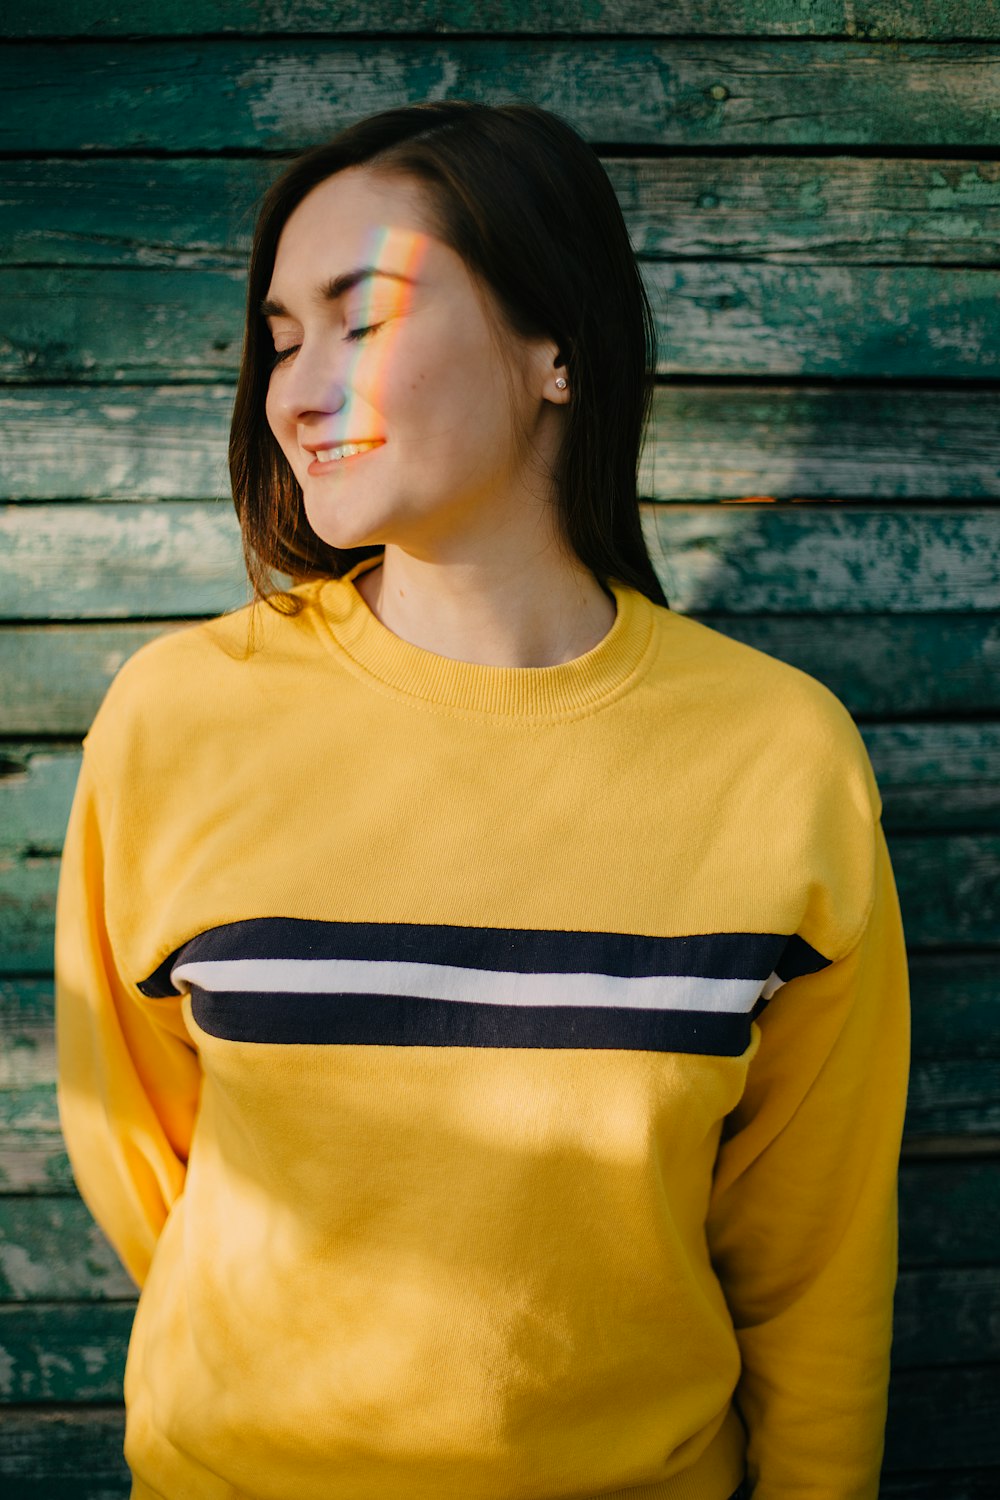 woman in yellow and black crew neck shirt